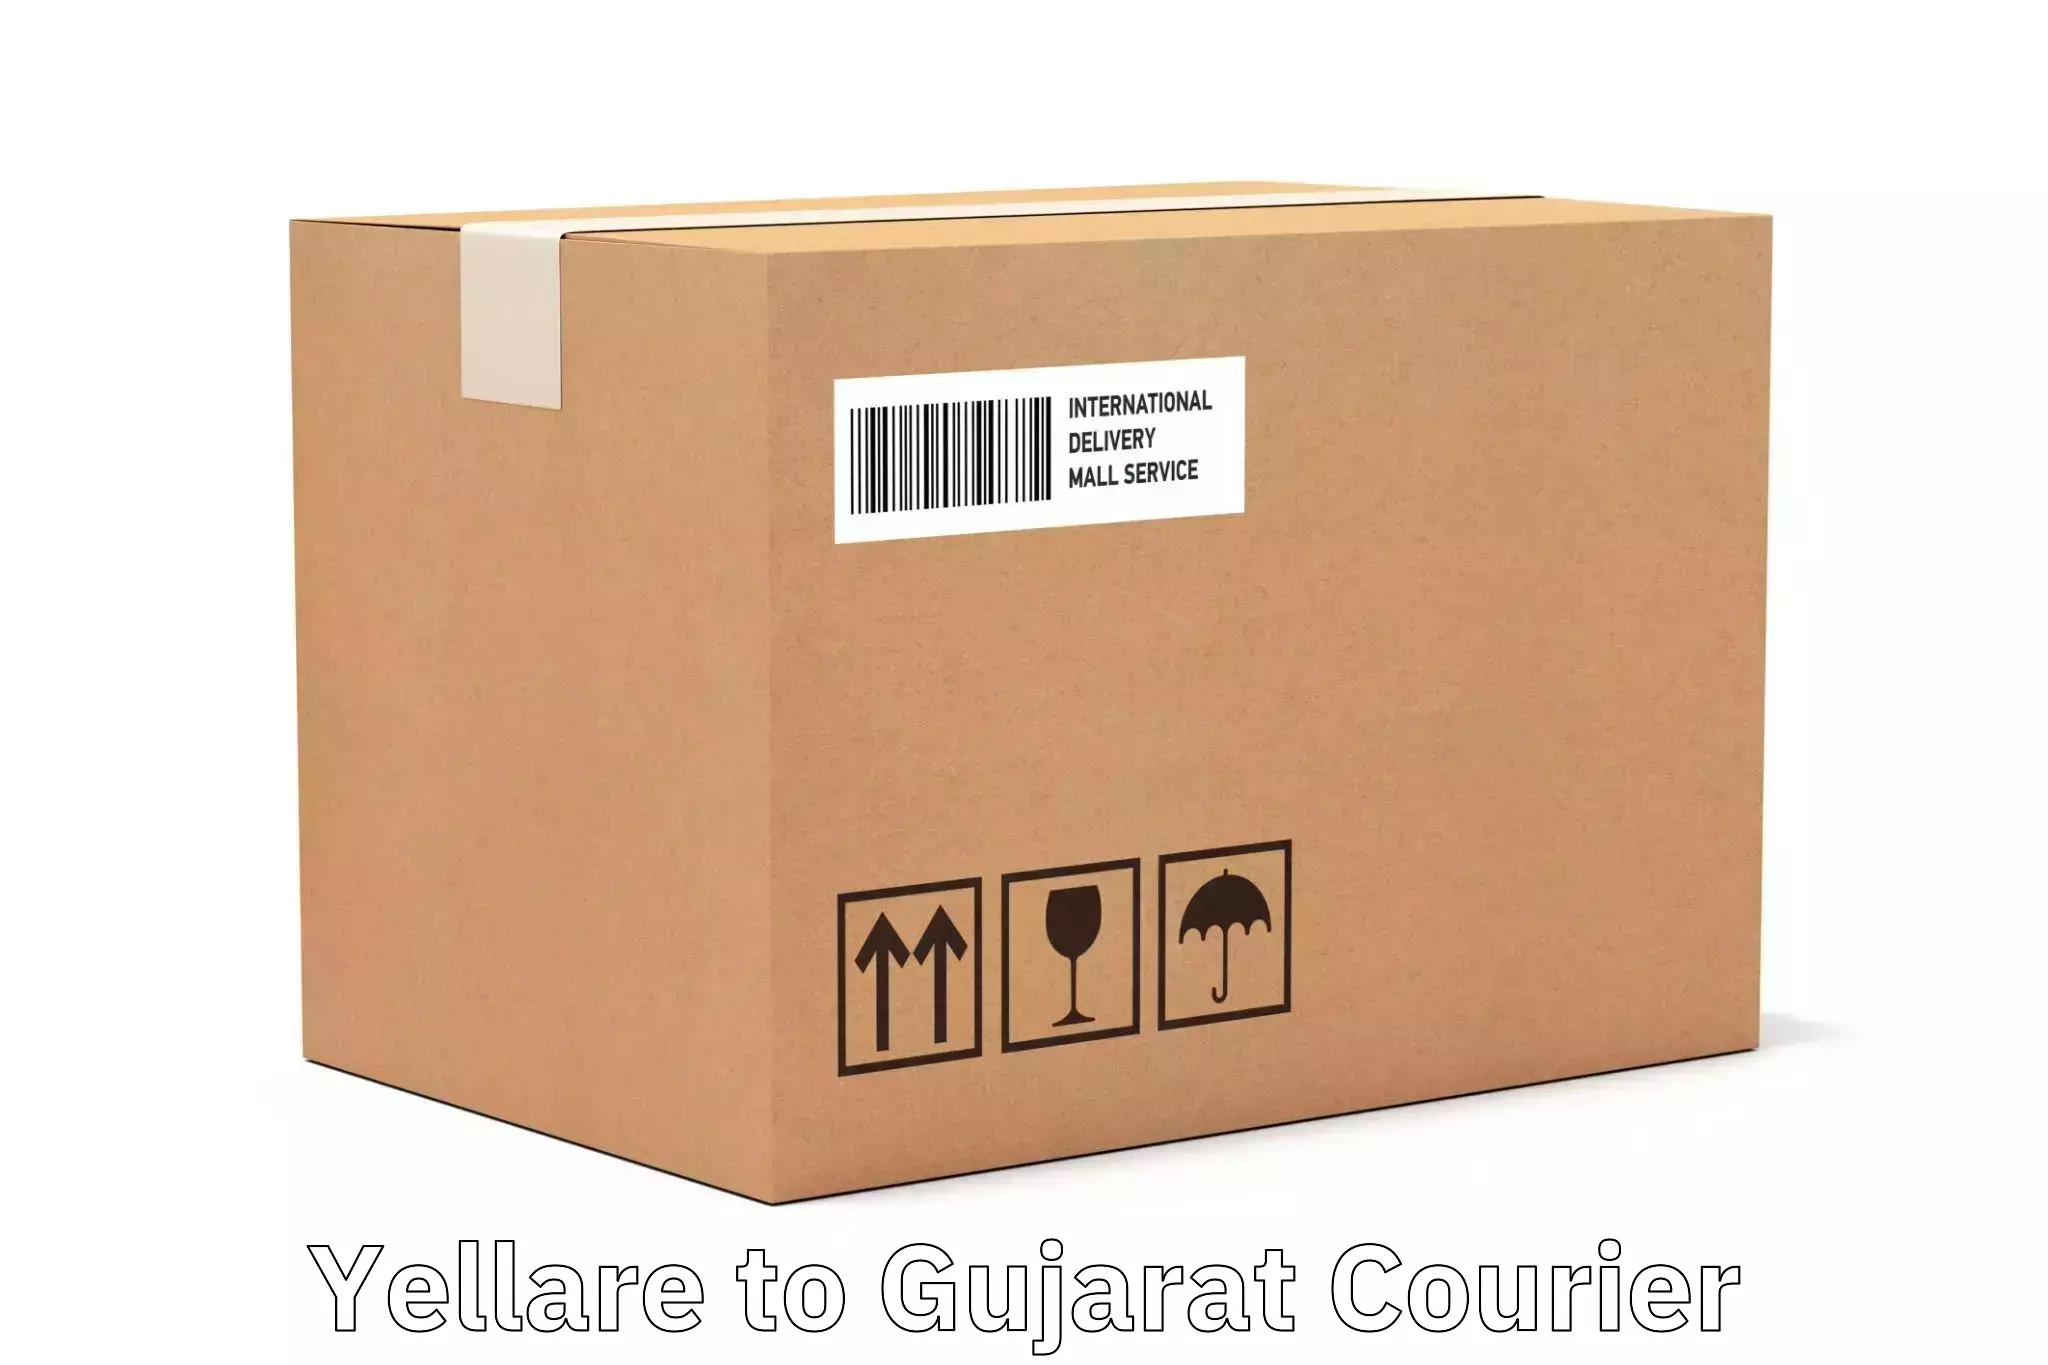 Efficient parcel tracking Yellare to Surat